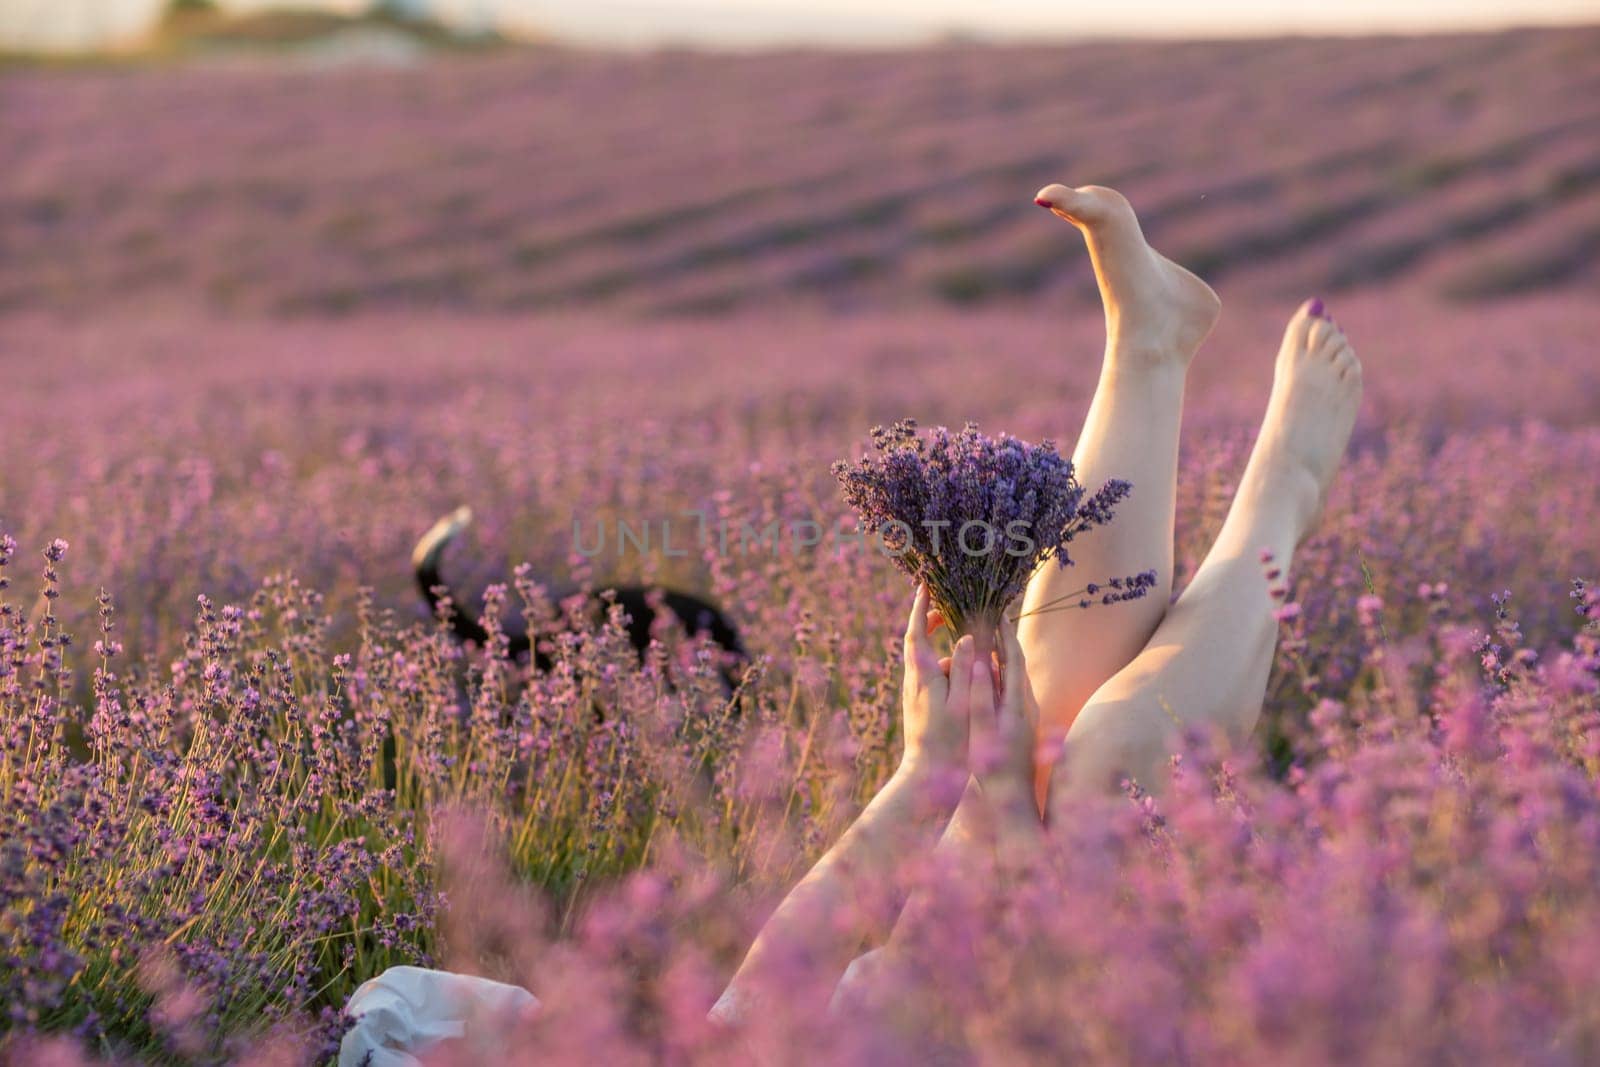 A woman is laying in a field of purple flowers with her legs spread out. She is holding a bouquet of flowers in her hands. The scene is peaceful and serene